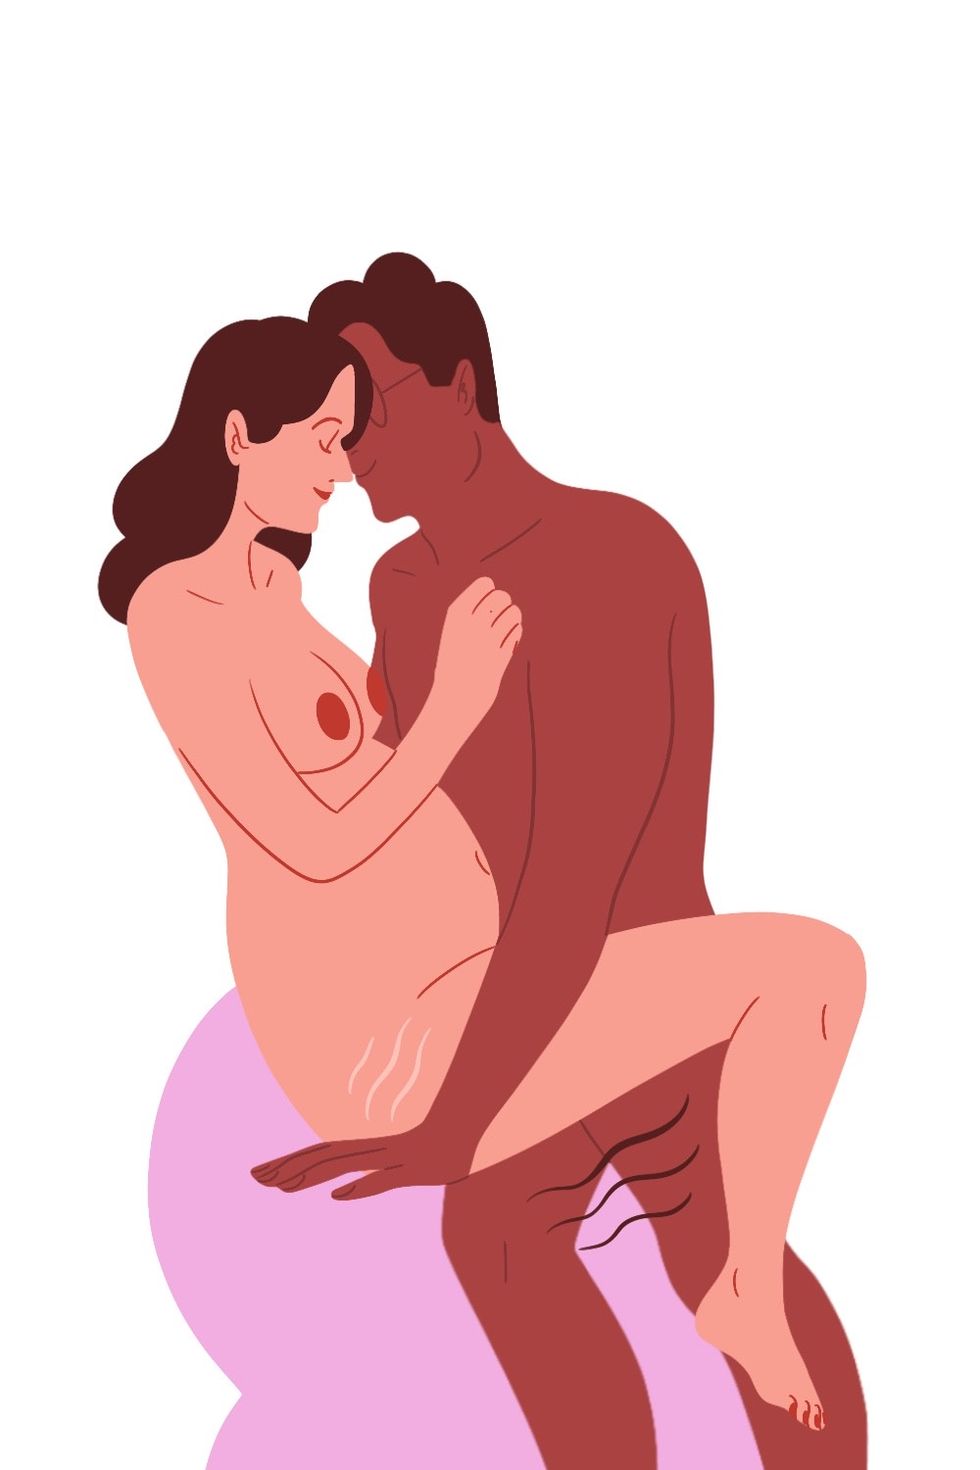 22 Pregnancy Sex Positions - How to Have Safe Sex While Pregnant